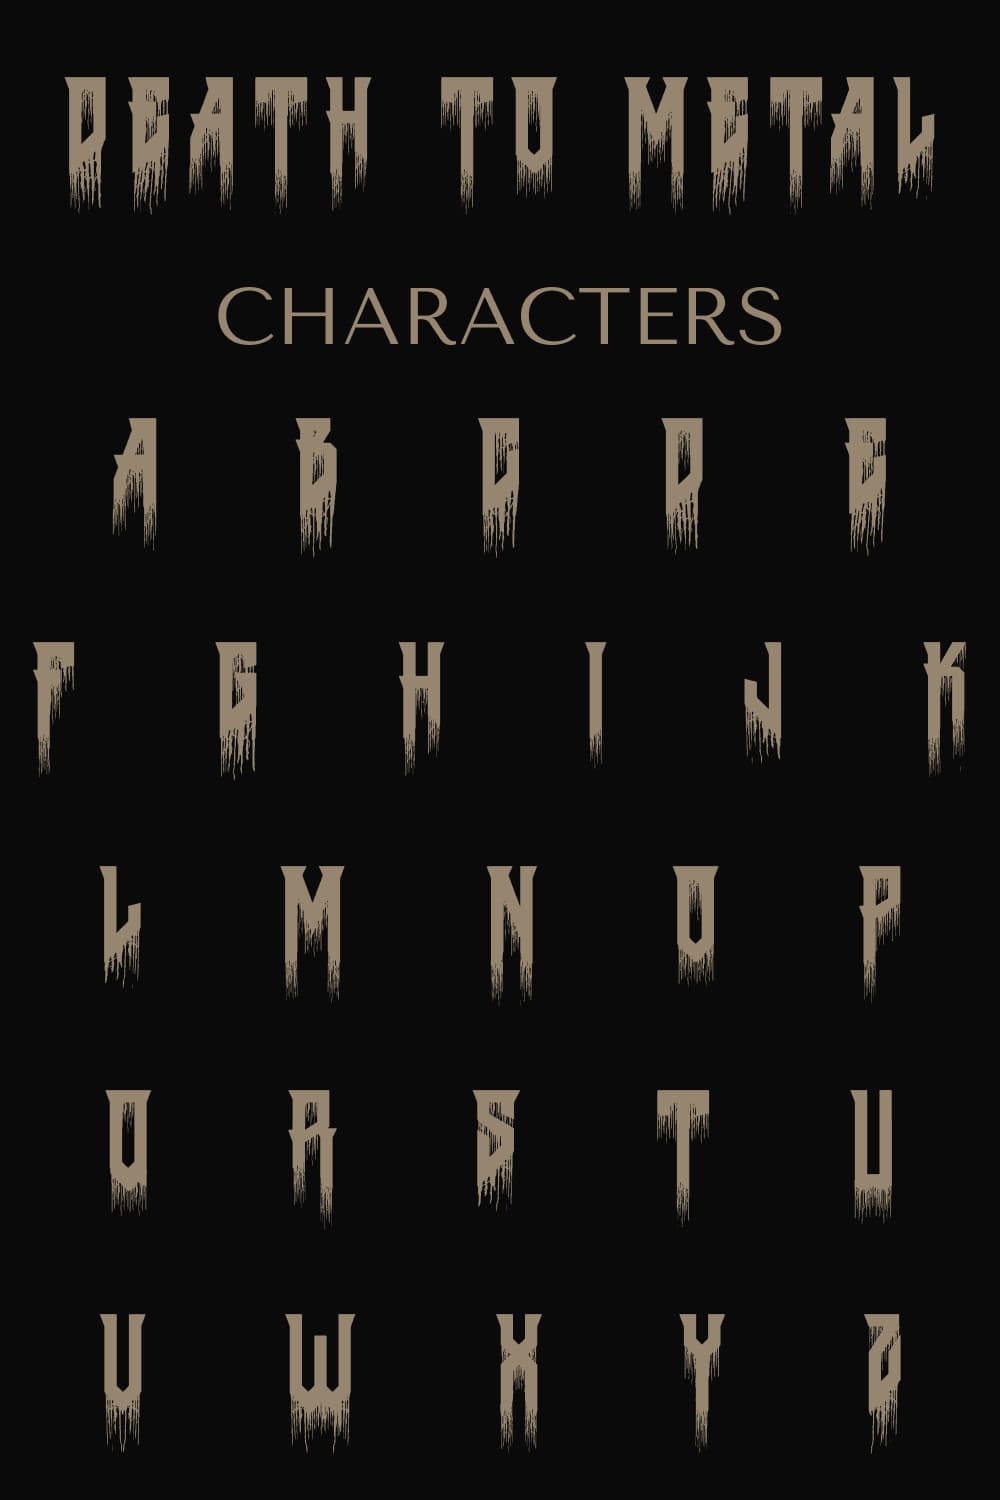 Main characters of font.